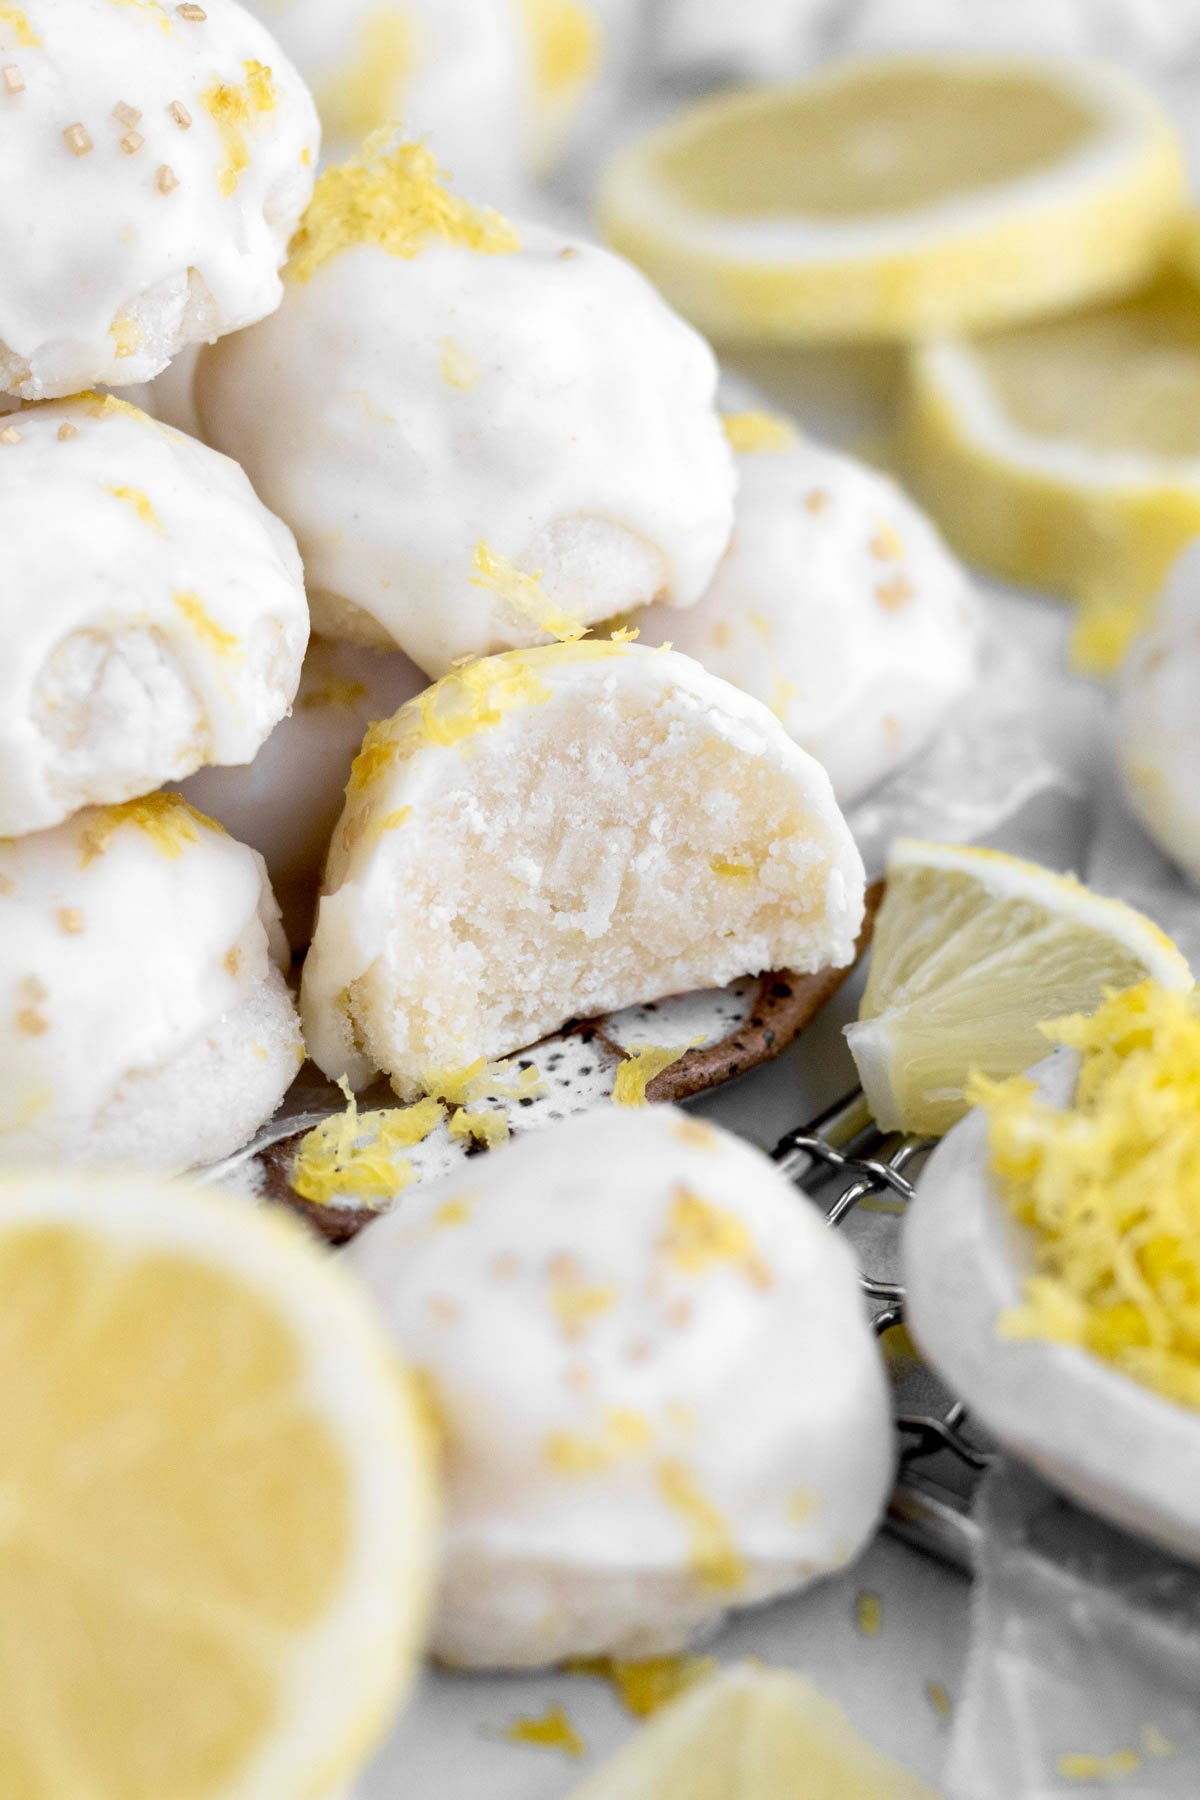 A bite reveals the soft buttery interior of the Lemon Shortbread Cookie balls.